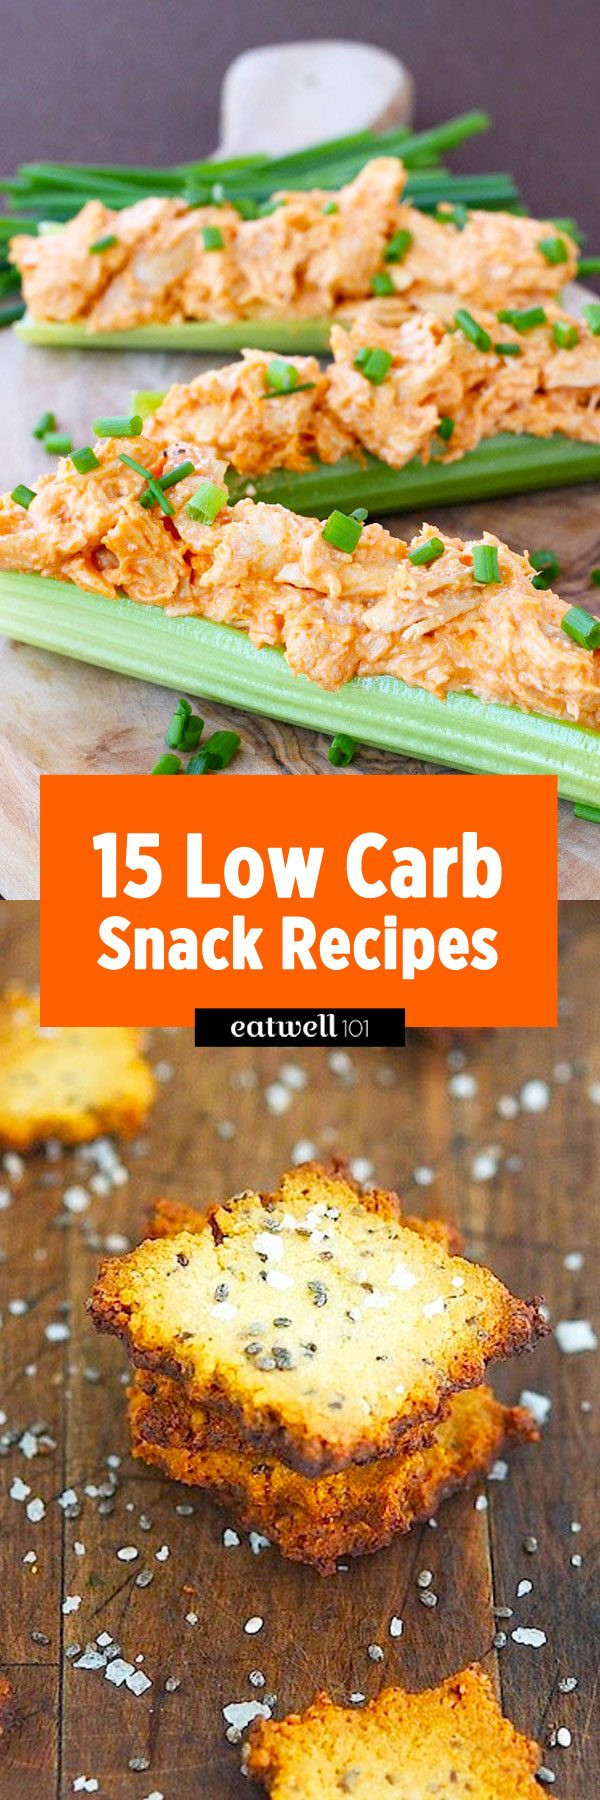 101 Low Carb Recipes
 Low Carb Snack Recipes 15 Options to Keep You Healthy and